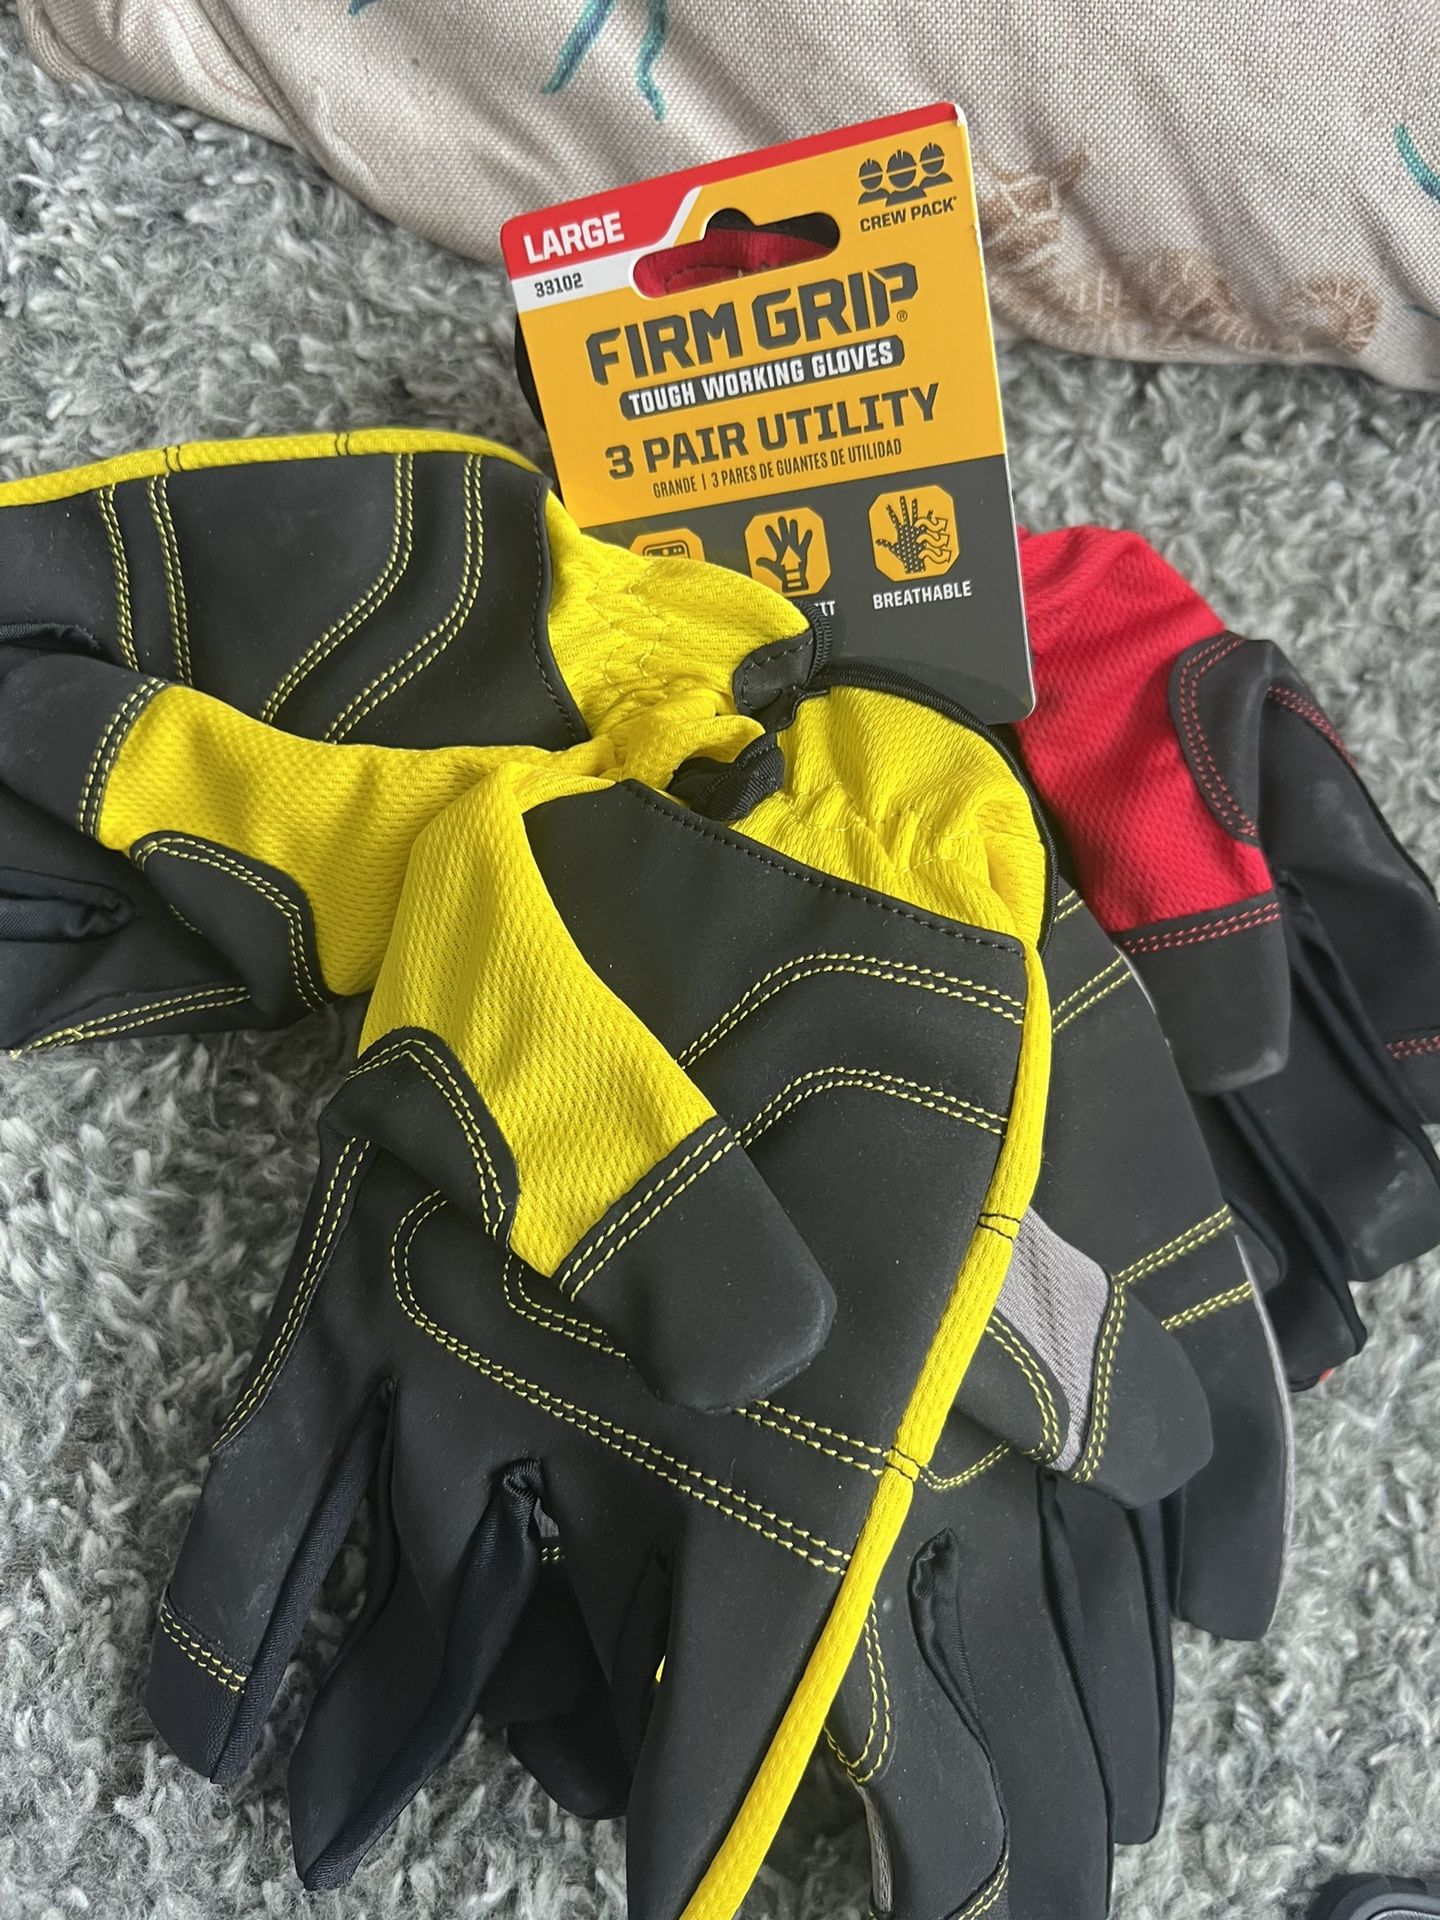 New Large Three Firm Grip Pair Utility Gloves$8.00